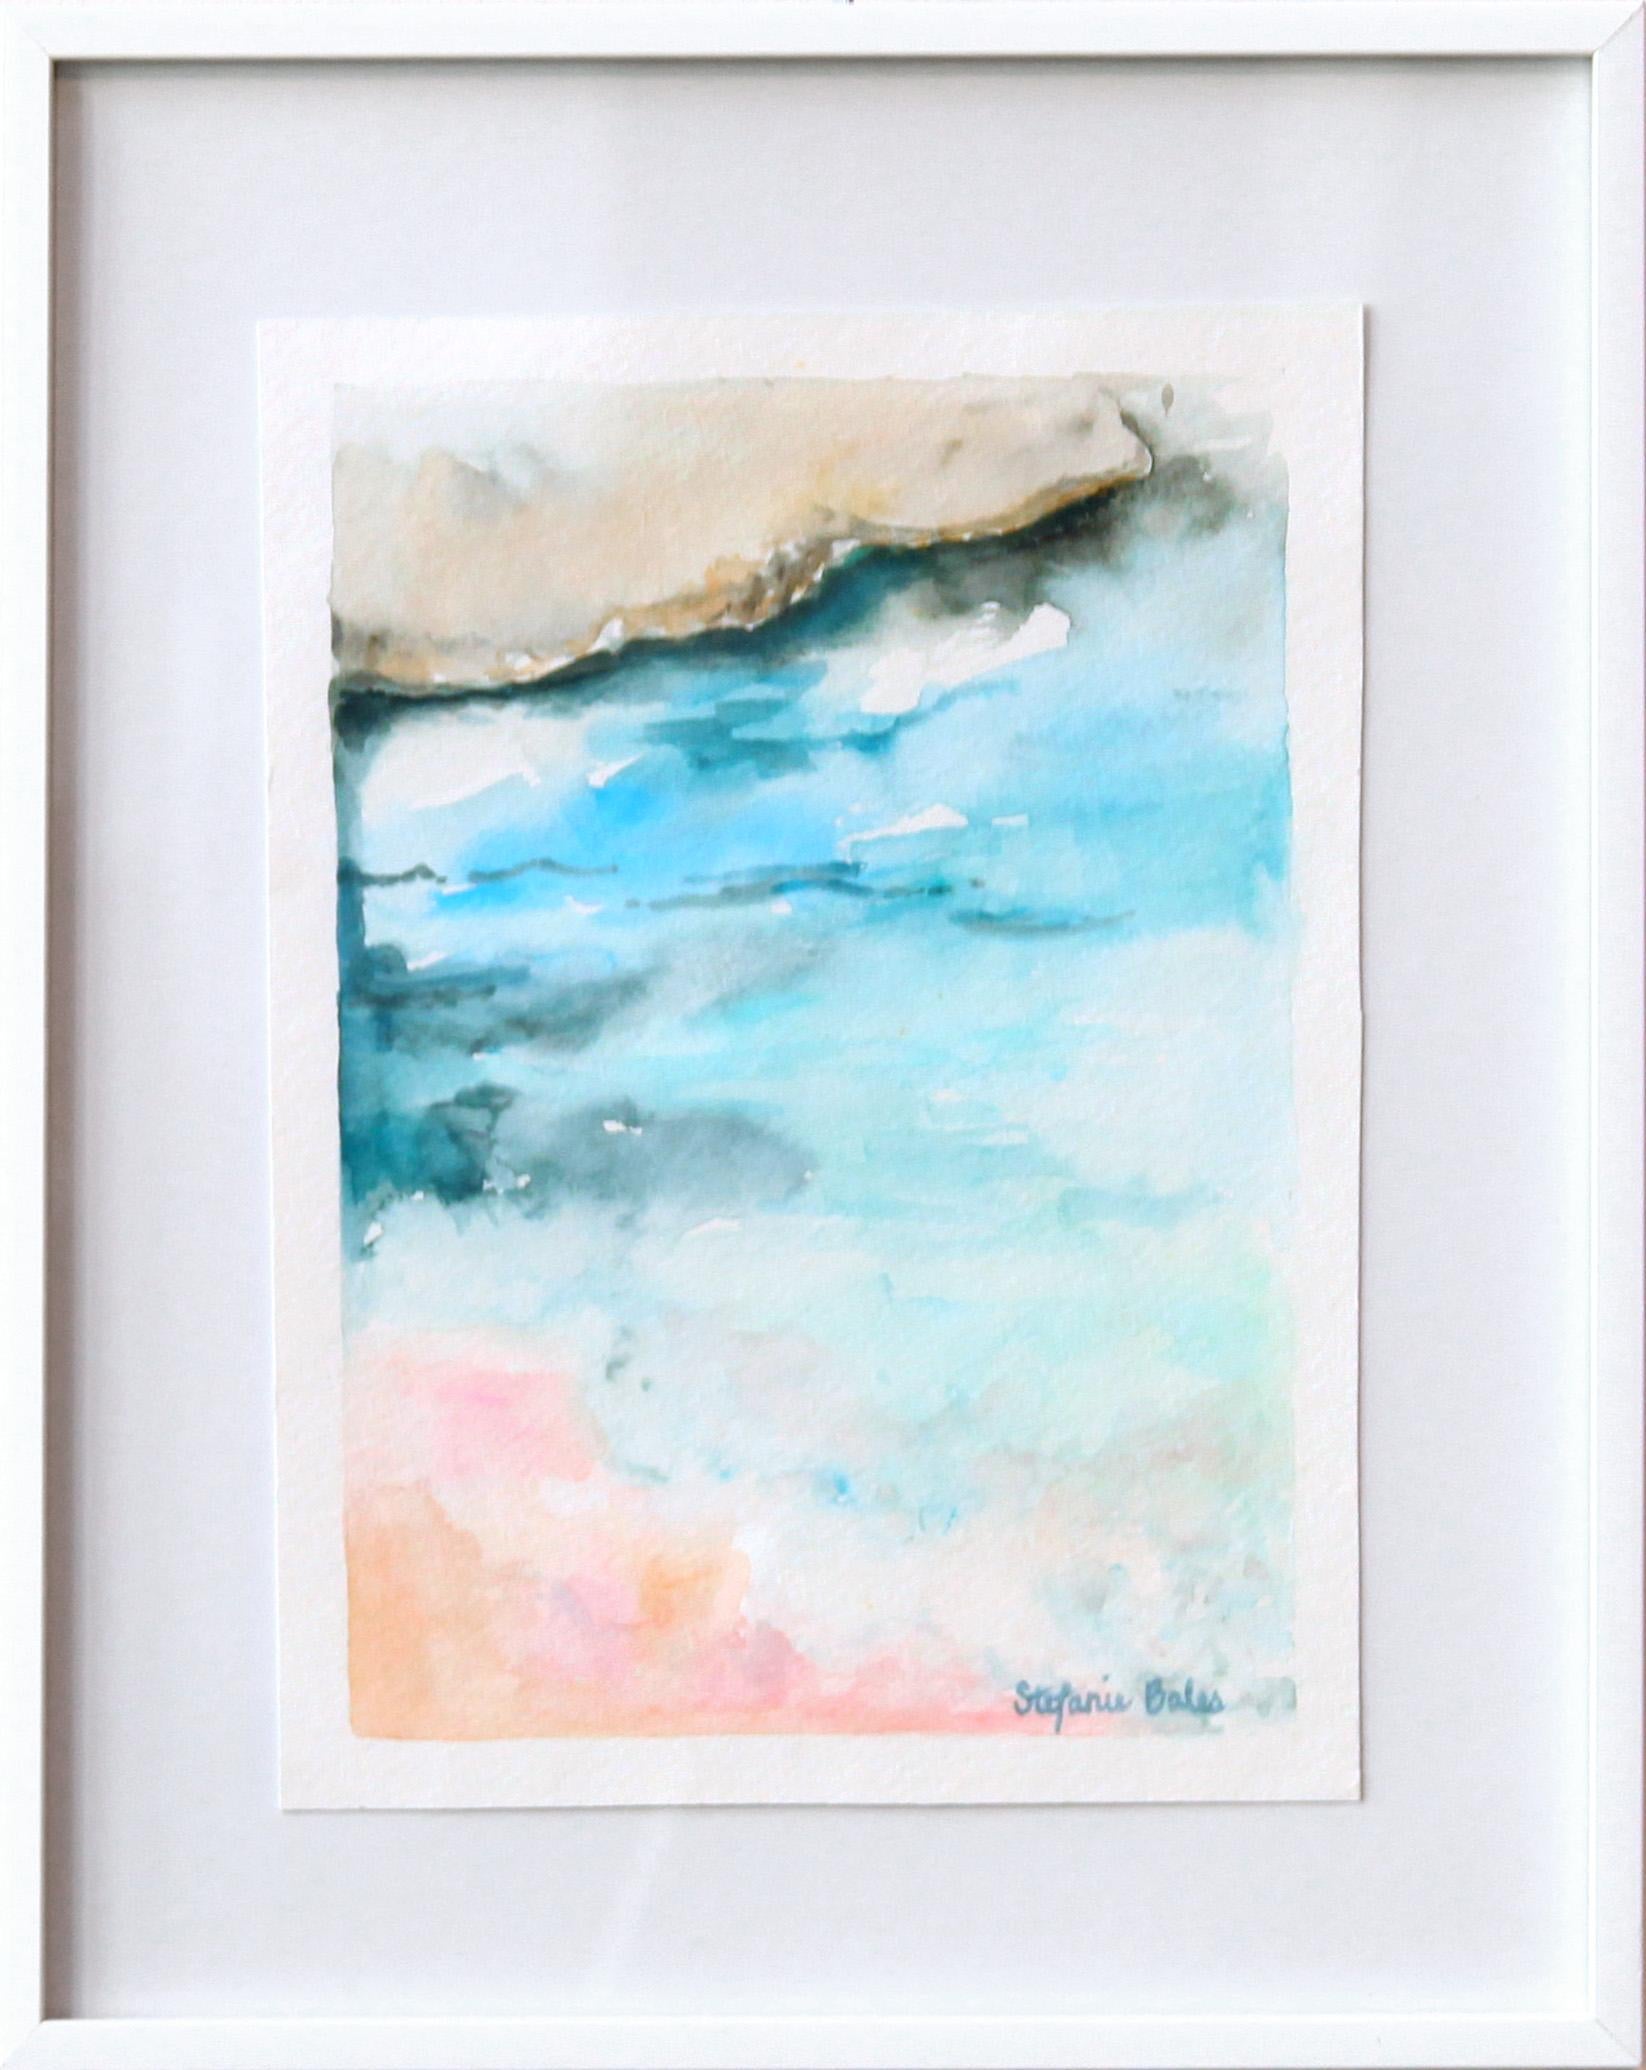 An Abstract Impressionist Watercolor on Paper Landscape Painting, "Sea Dreams"